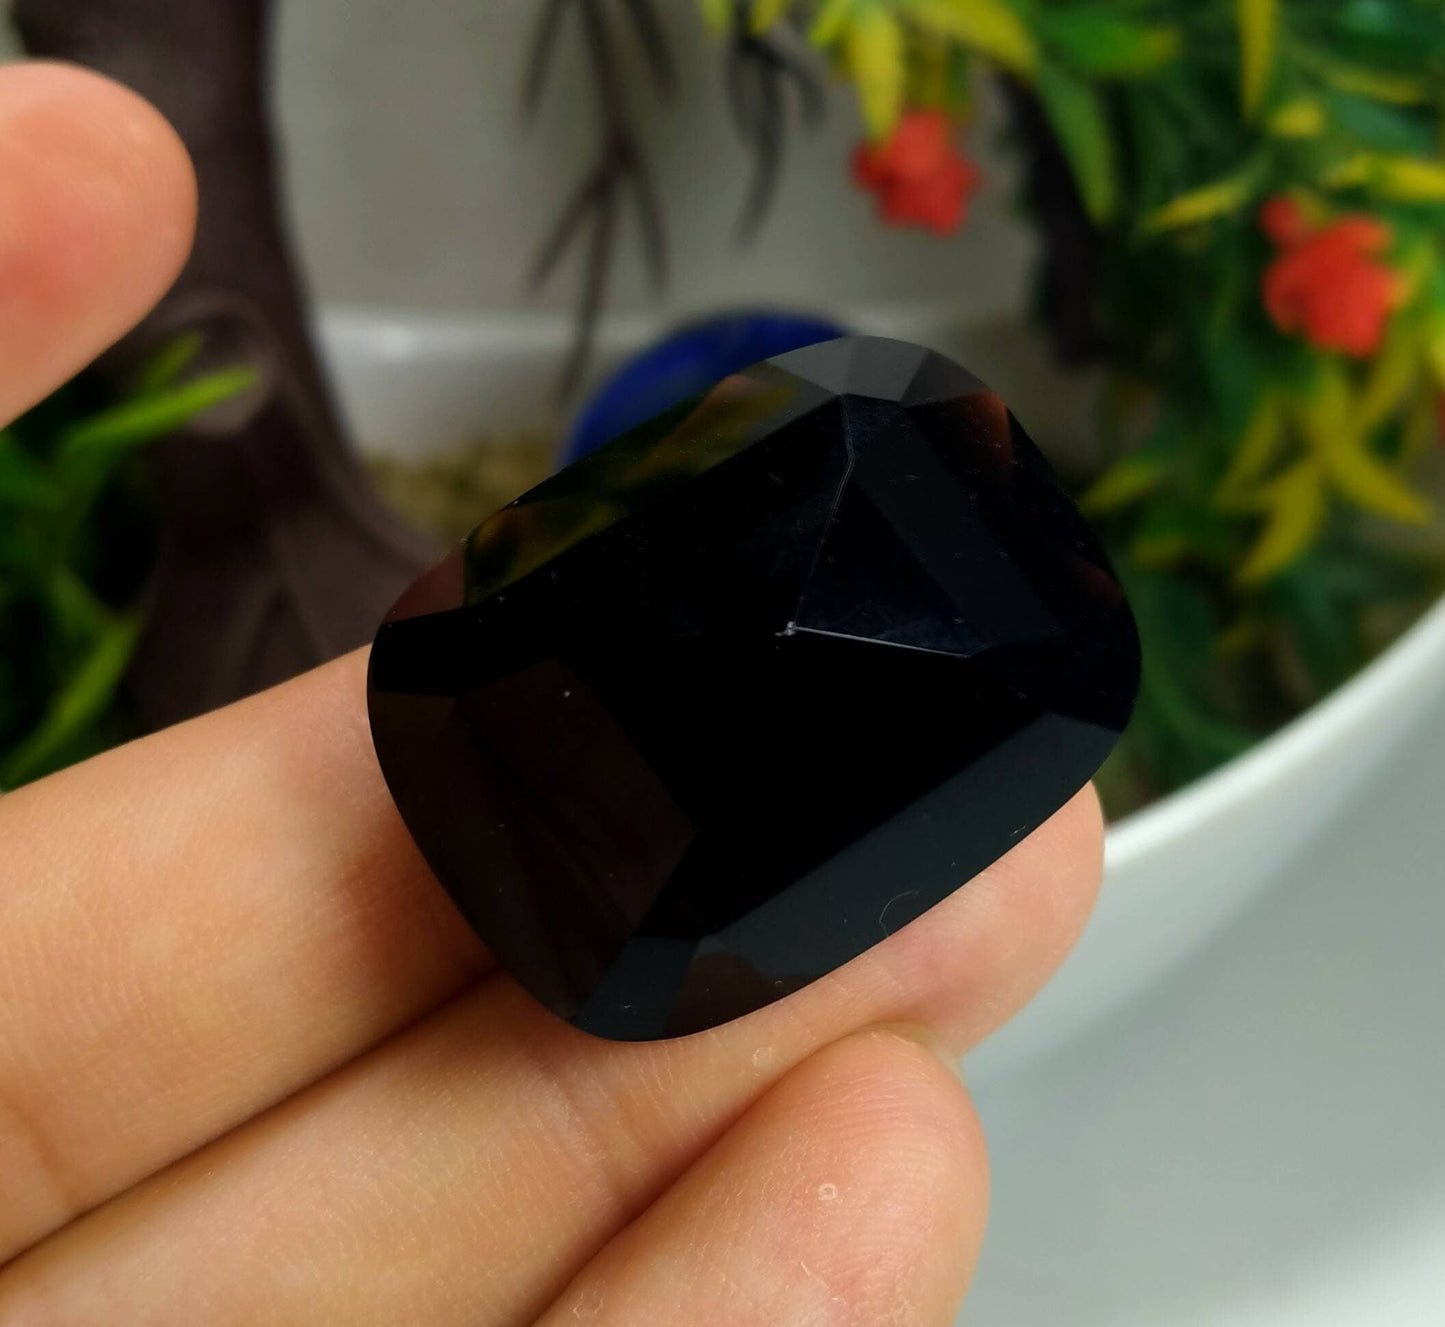 ARSAA GEMS AND MINERALSNatural fine quality beautiful 69 carats faceted radiant shape smokey quartz gem - Premium  from ARSAA GEMS AND MINERALS - Just $20.00! Shop now at ARSAA GEMS AND MINERALS